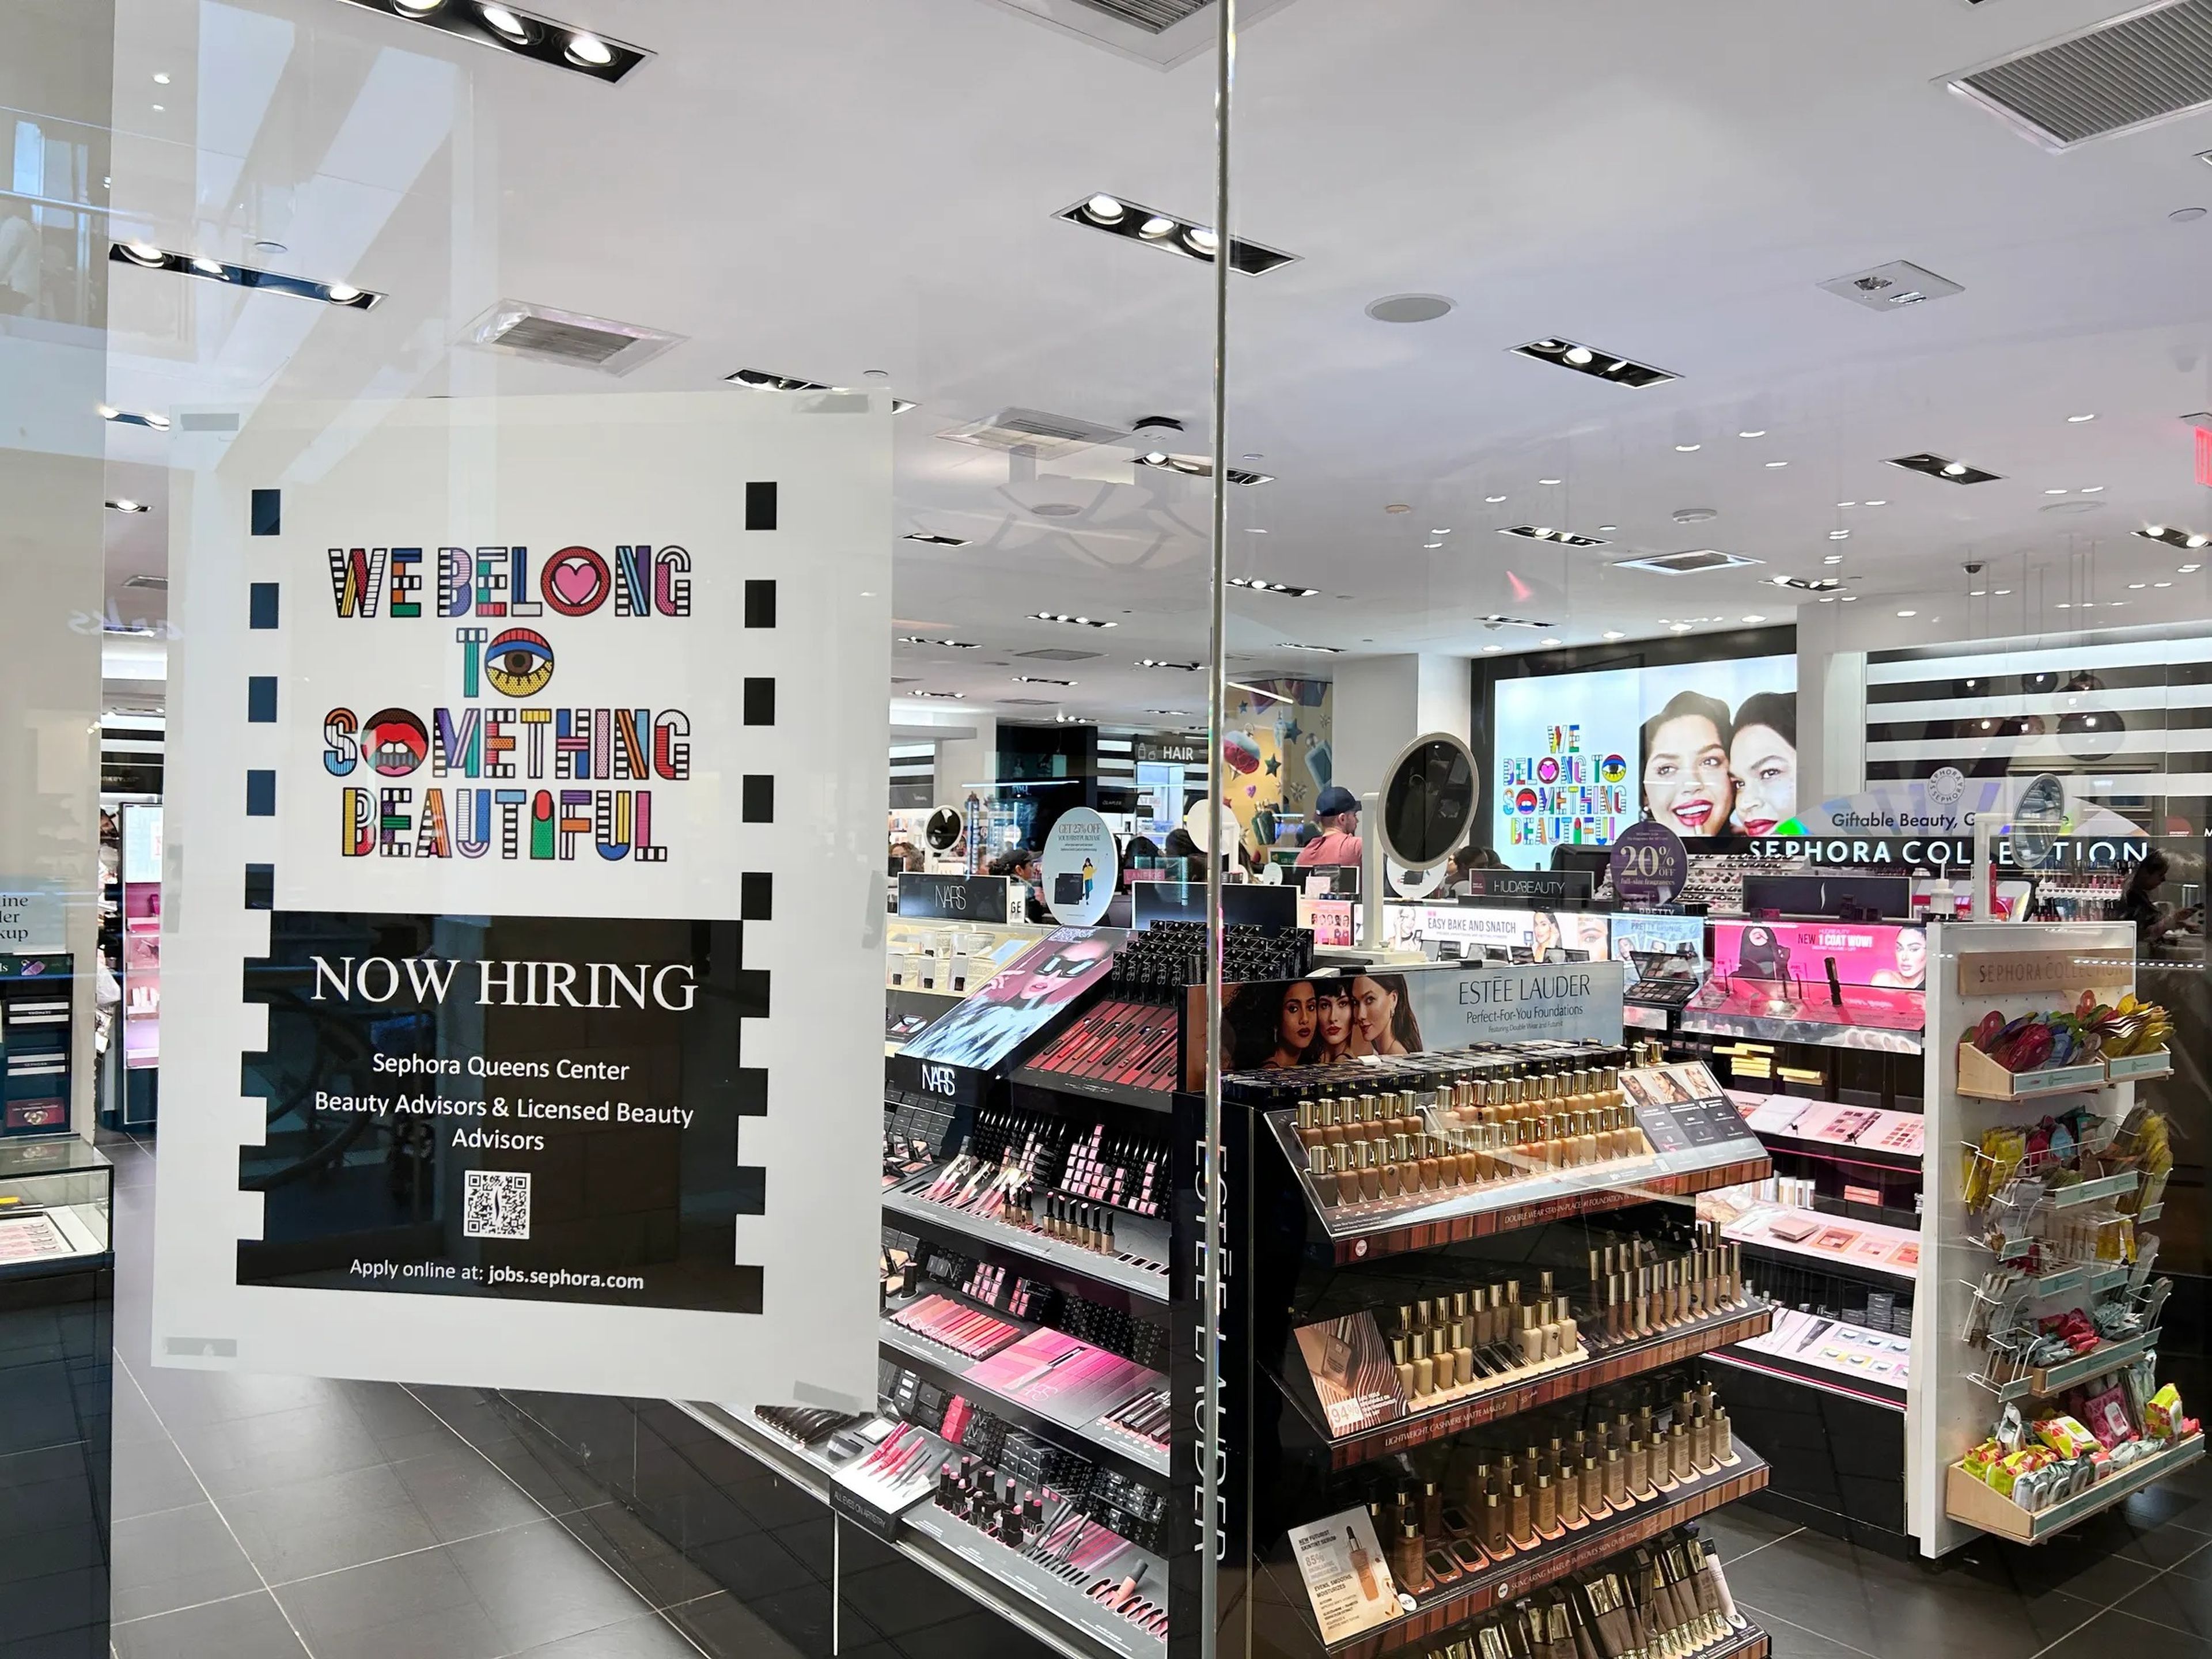 "now hiring" sign posted outside of Sephora